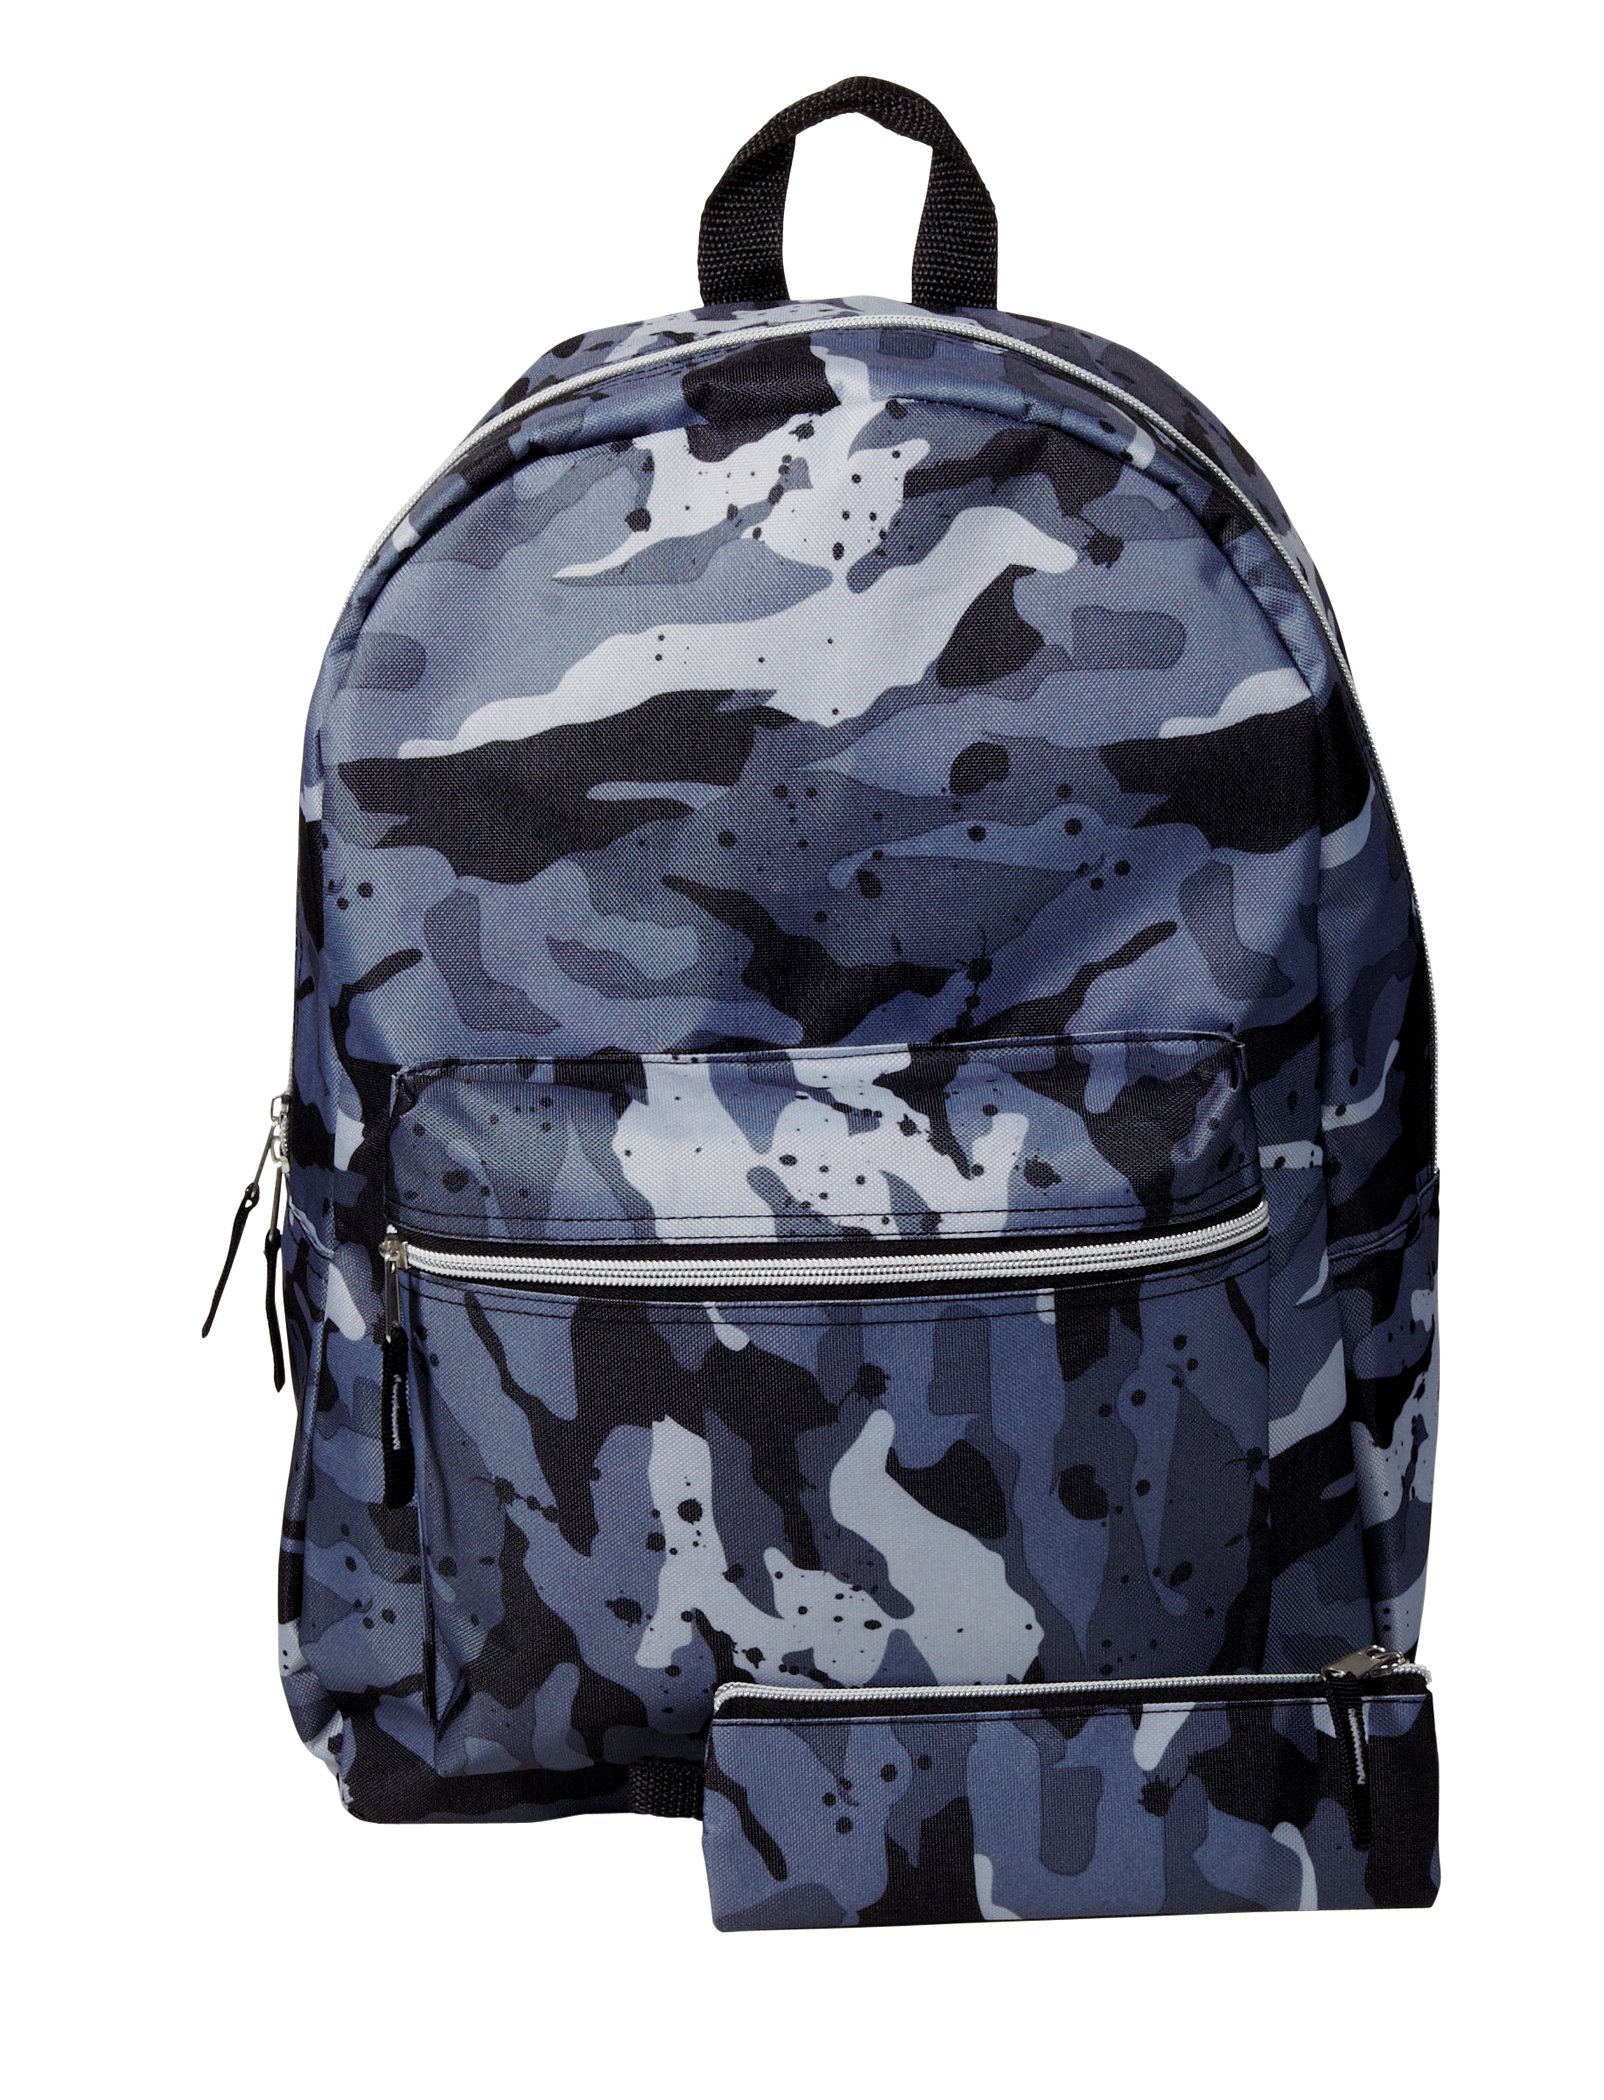 Mystic Boys Gray Camo Backpack With Pencil Case - Shop Backpacks at H-E-B